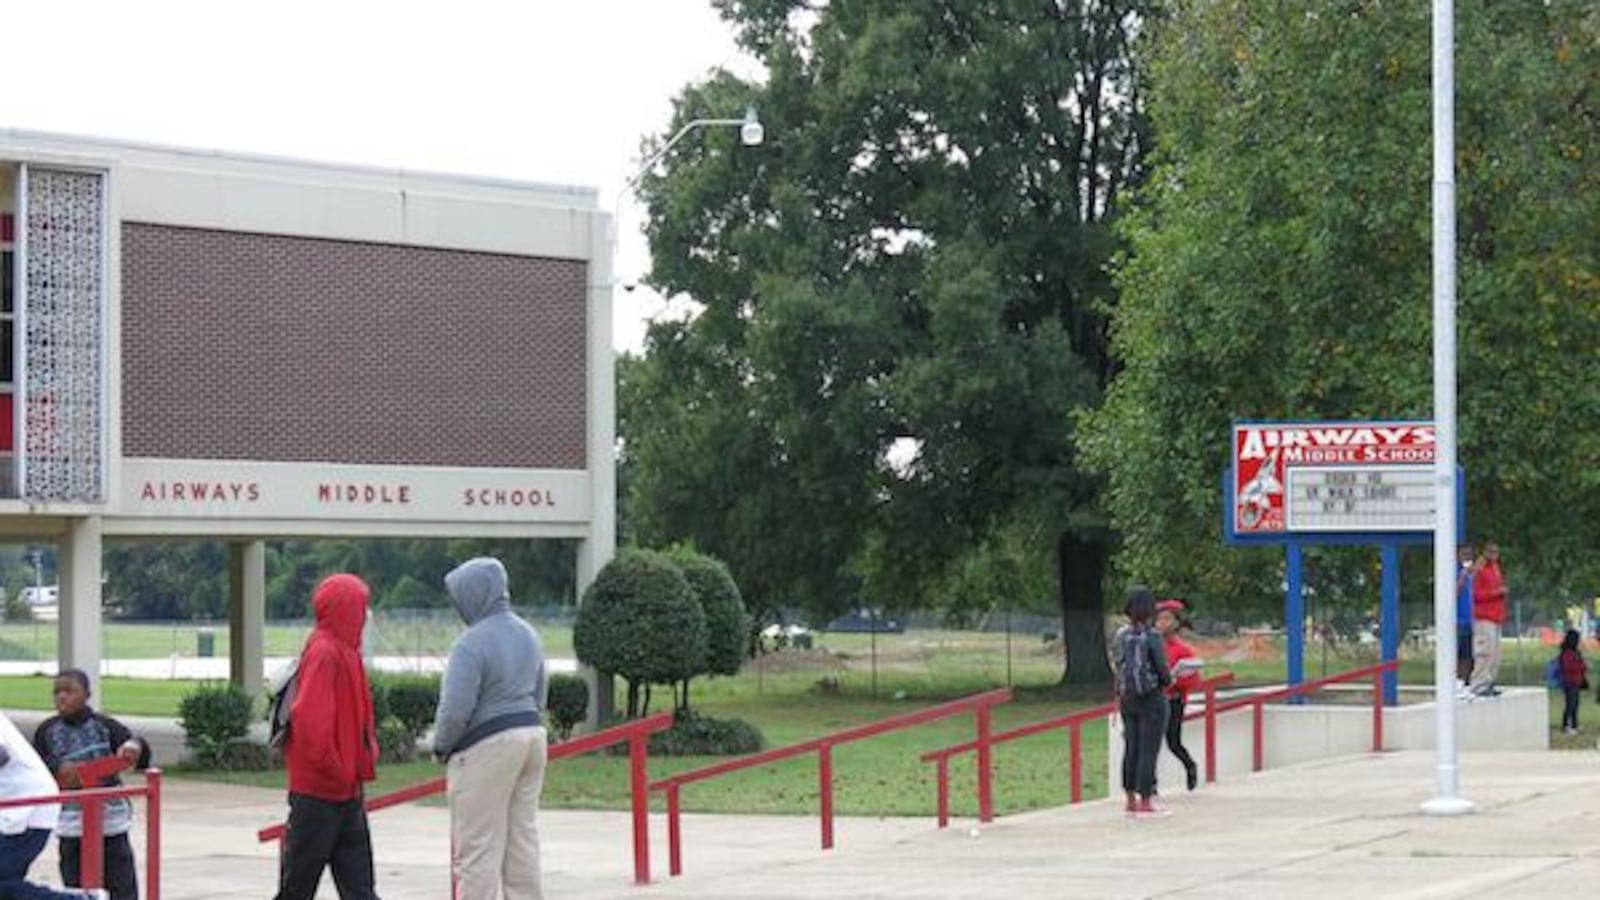 The Achievement School District tried to bring a new operator to Airways Middle School, a long-struggling school in Memphis.